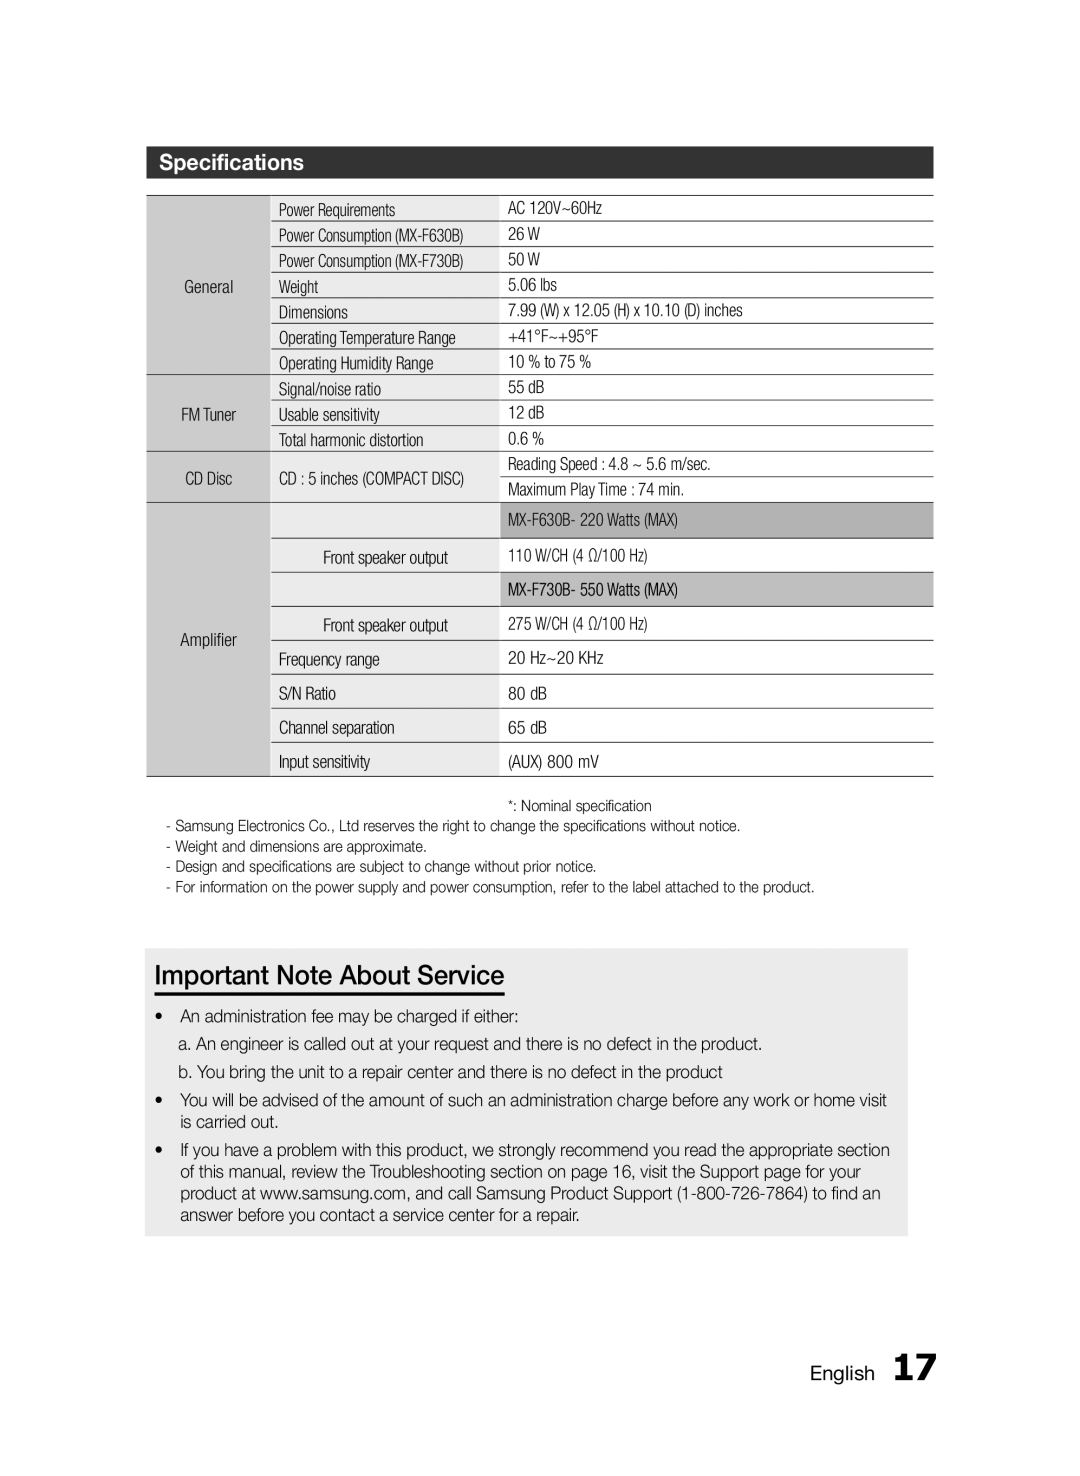 Samsung MXF630BZA user manual Important Note About Service, Specifications, English 